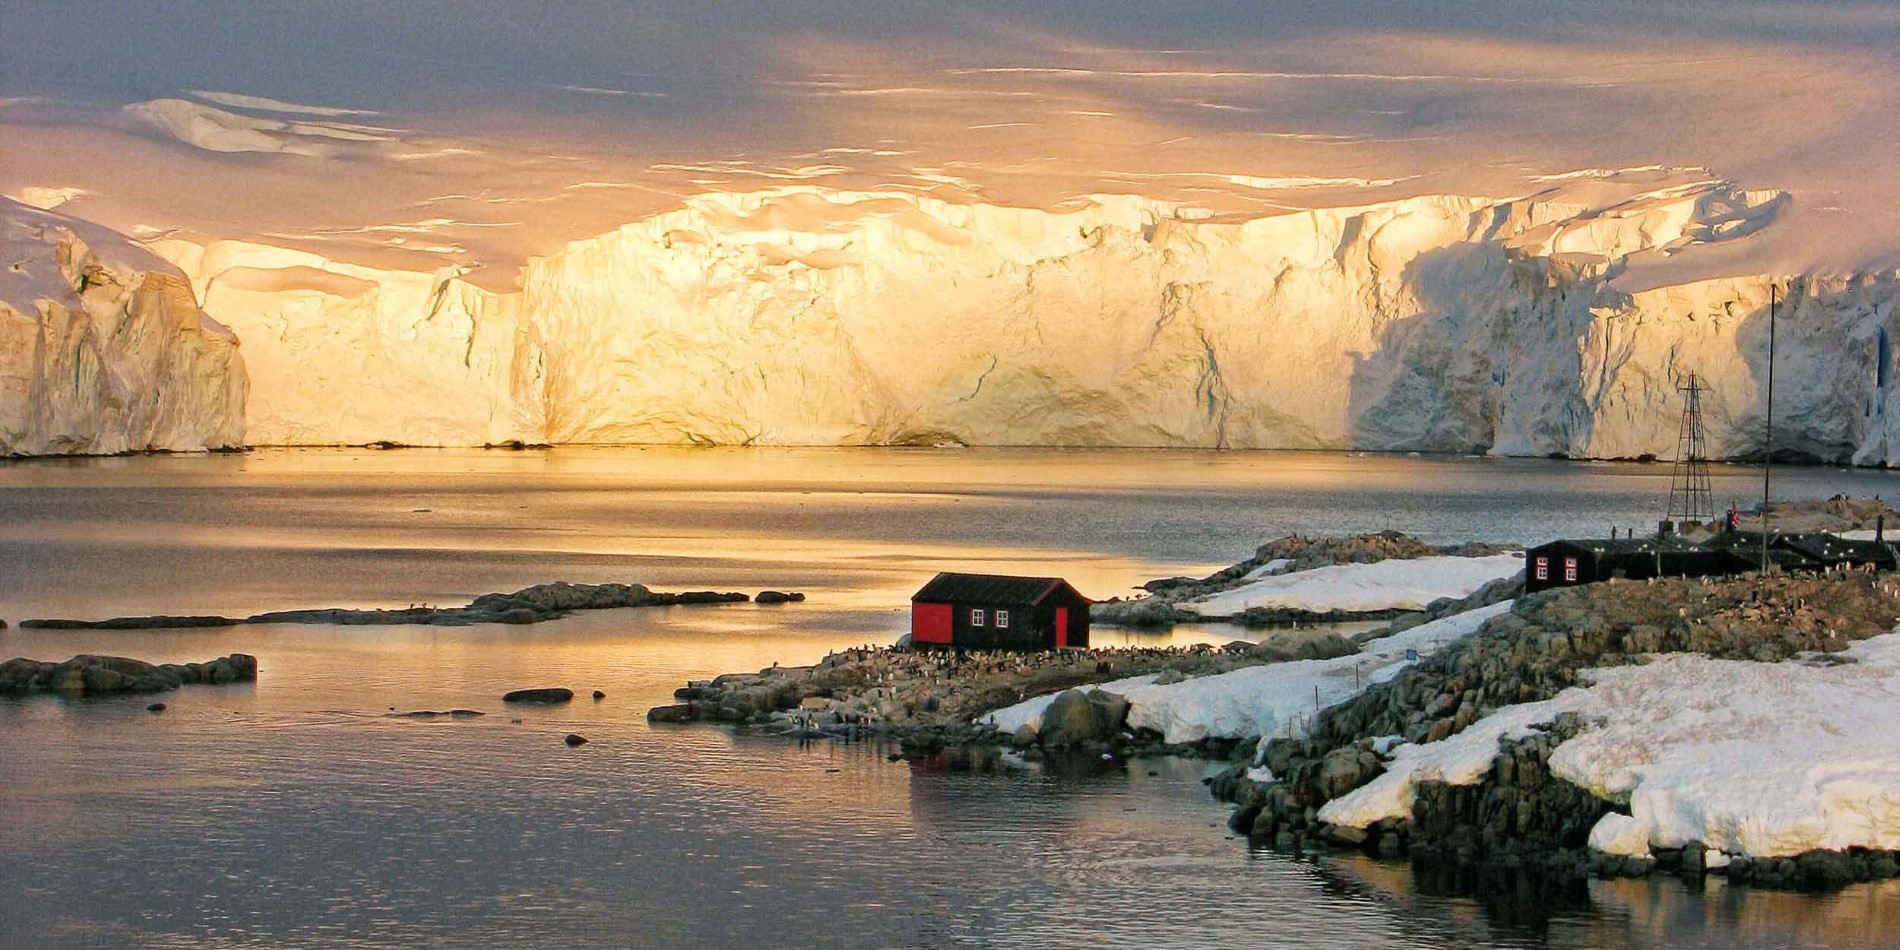 Enjoy close encounters with the wildlife and glaciers, old whaling stations and relics